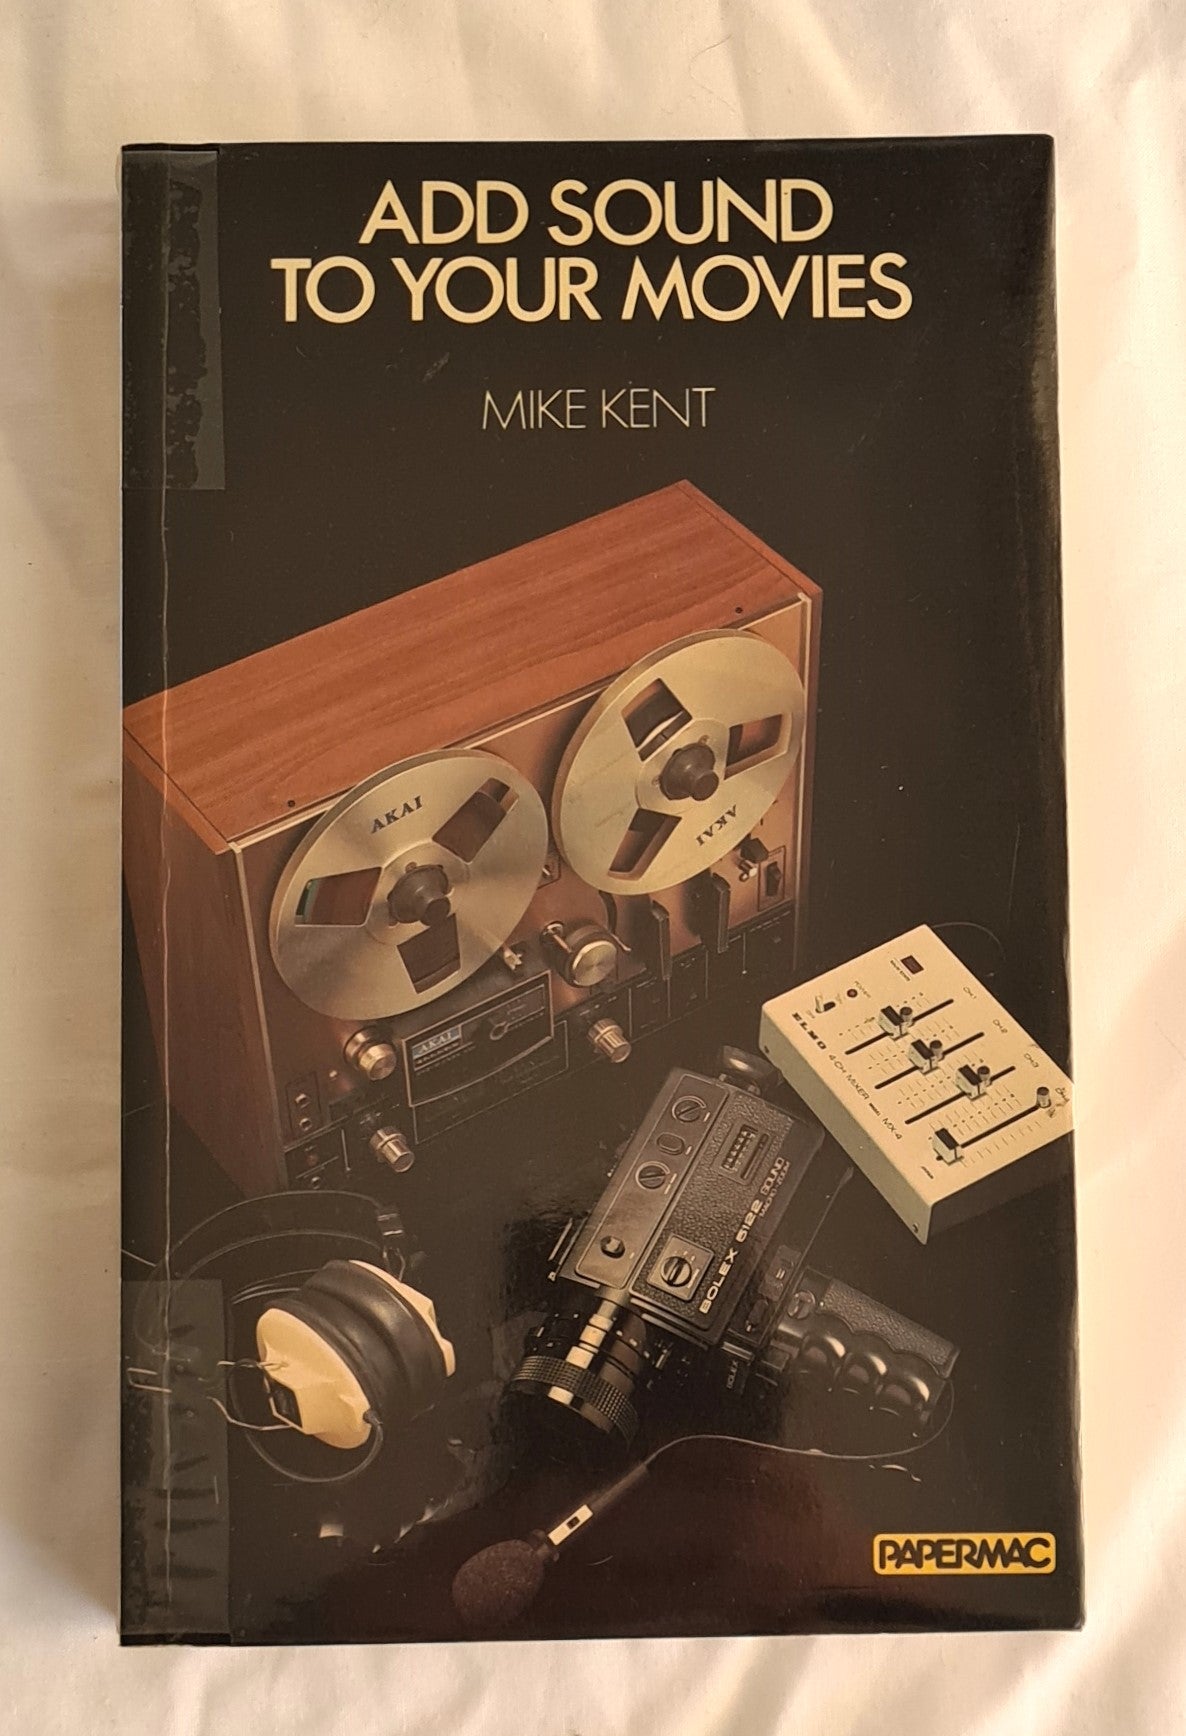 Add Sound to Yor Moves  A Practical Guide for the Amateur Film Maker  by Mike Kent